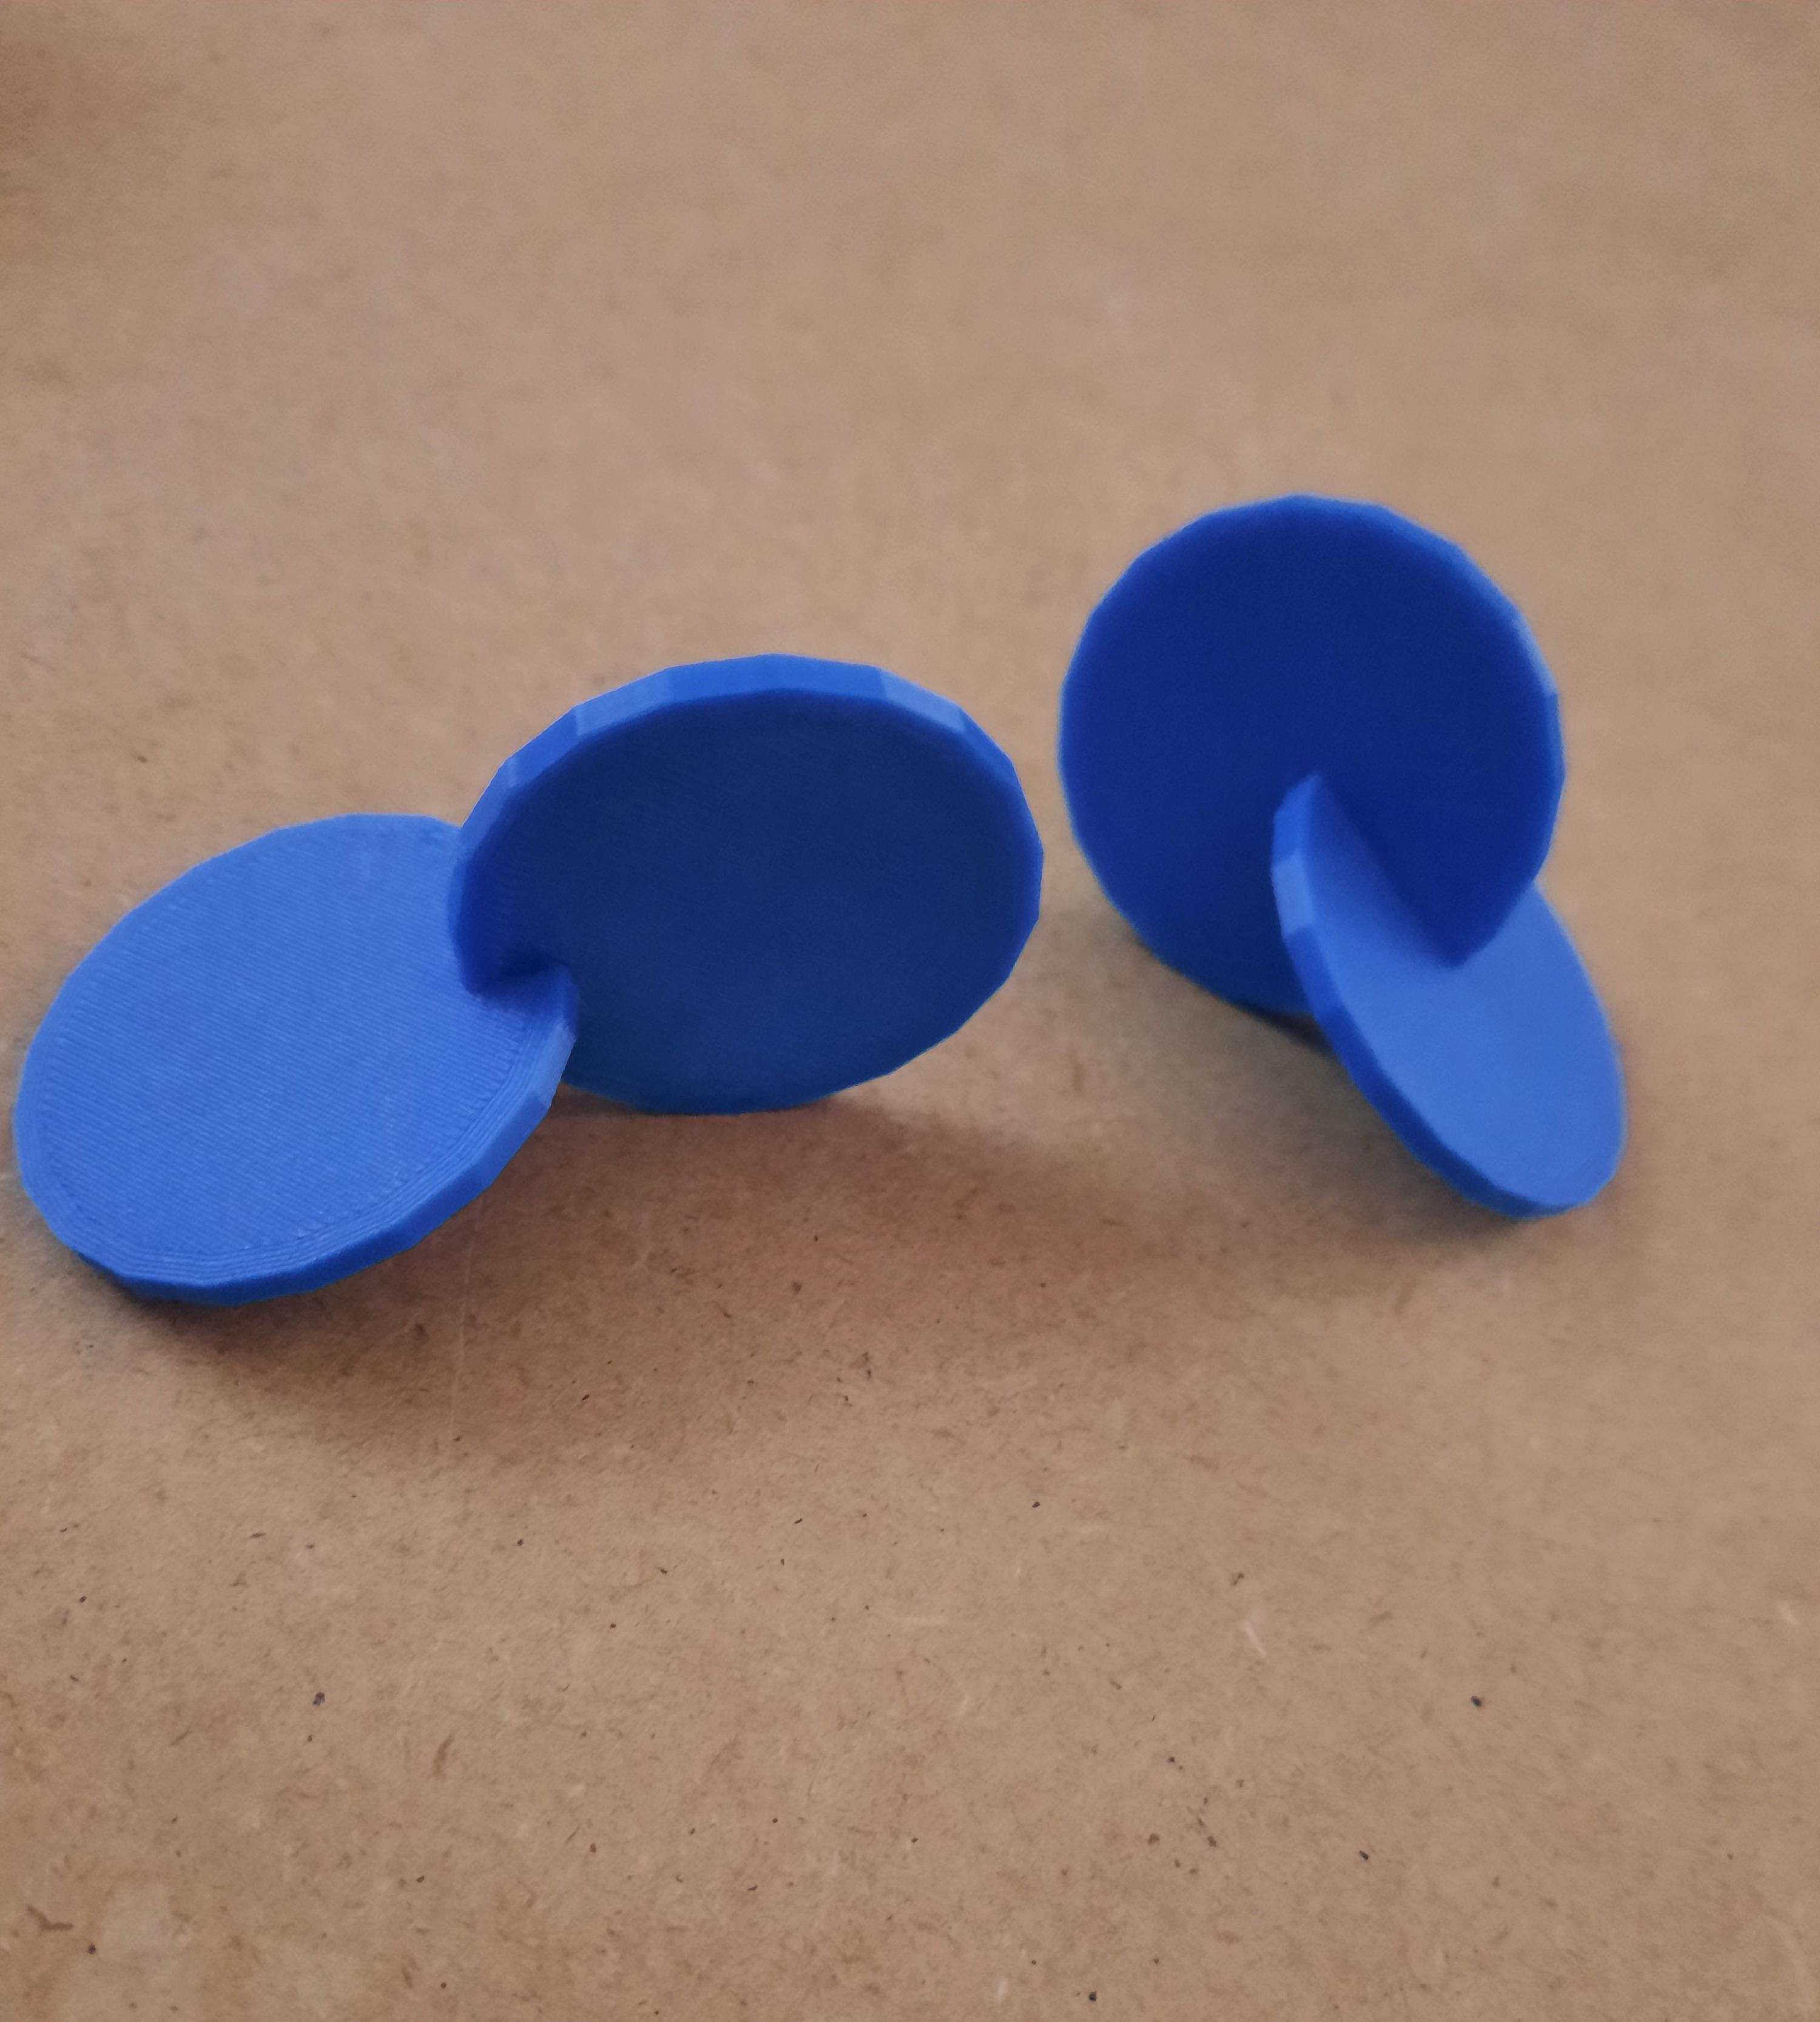 Wobble Coin Using Tinkercad for 3D Printing